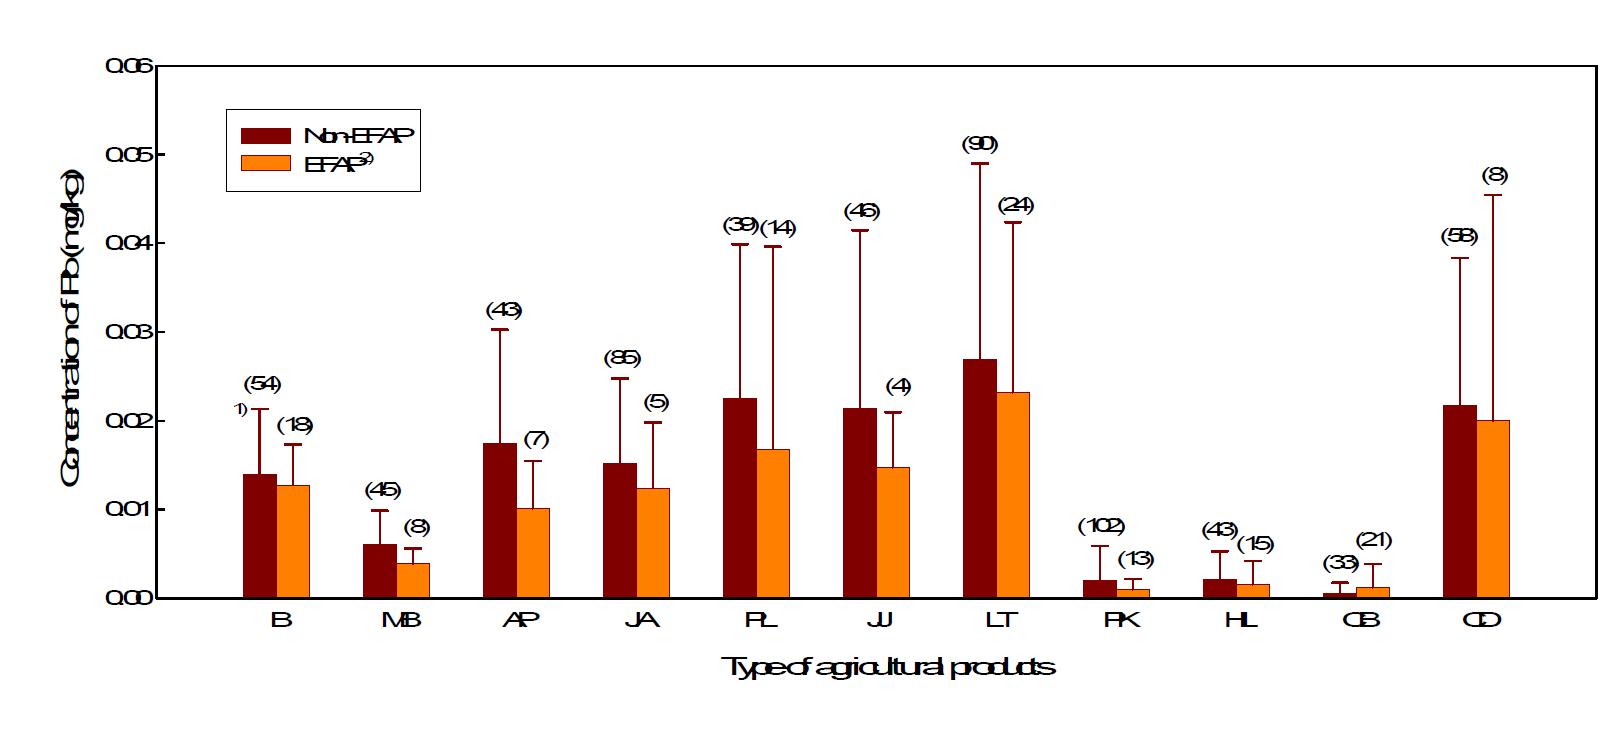 Pb Levels of environment-friendly agricultural product(EFAP) and non-EFAP in various agricultural products B : Barley, MB : Mung bean, PA : Pineapple, AP : Apricot, JA : Japanese apricot, PL : Plum, JJ : Jujube, LT : Lettuce, PK : Pumpkin, HL : Head lettuce, CB : Cabbage, CD : Crown daisy ( ) : Number of sample, 1) Standard deviation, 2) Environment-friendly agricultural products